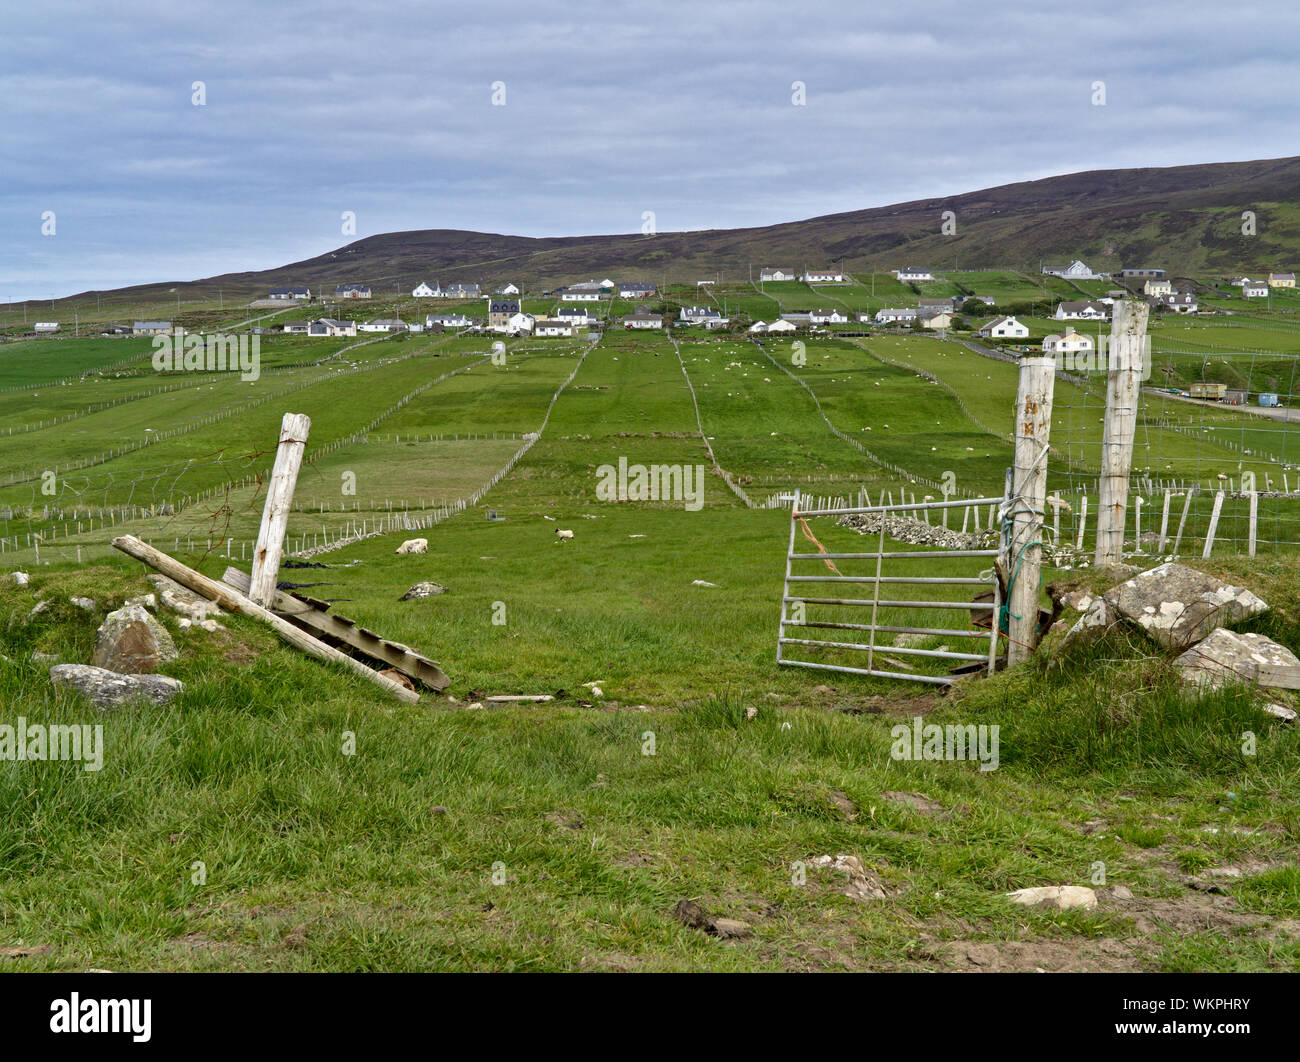 Green pasture with fence and open gate in the foreground and the village of Malinbeg in the background. Stock Photo